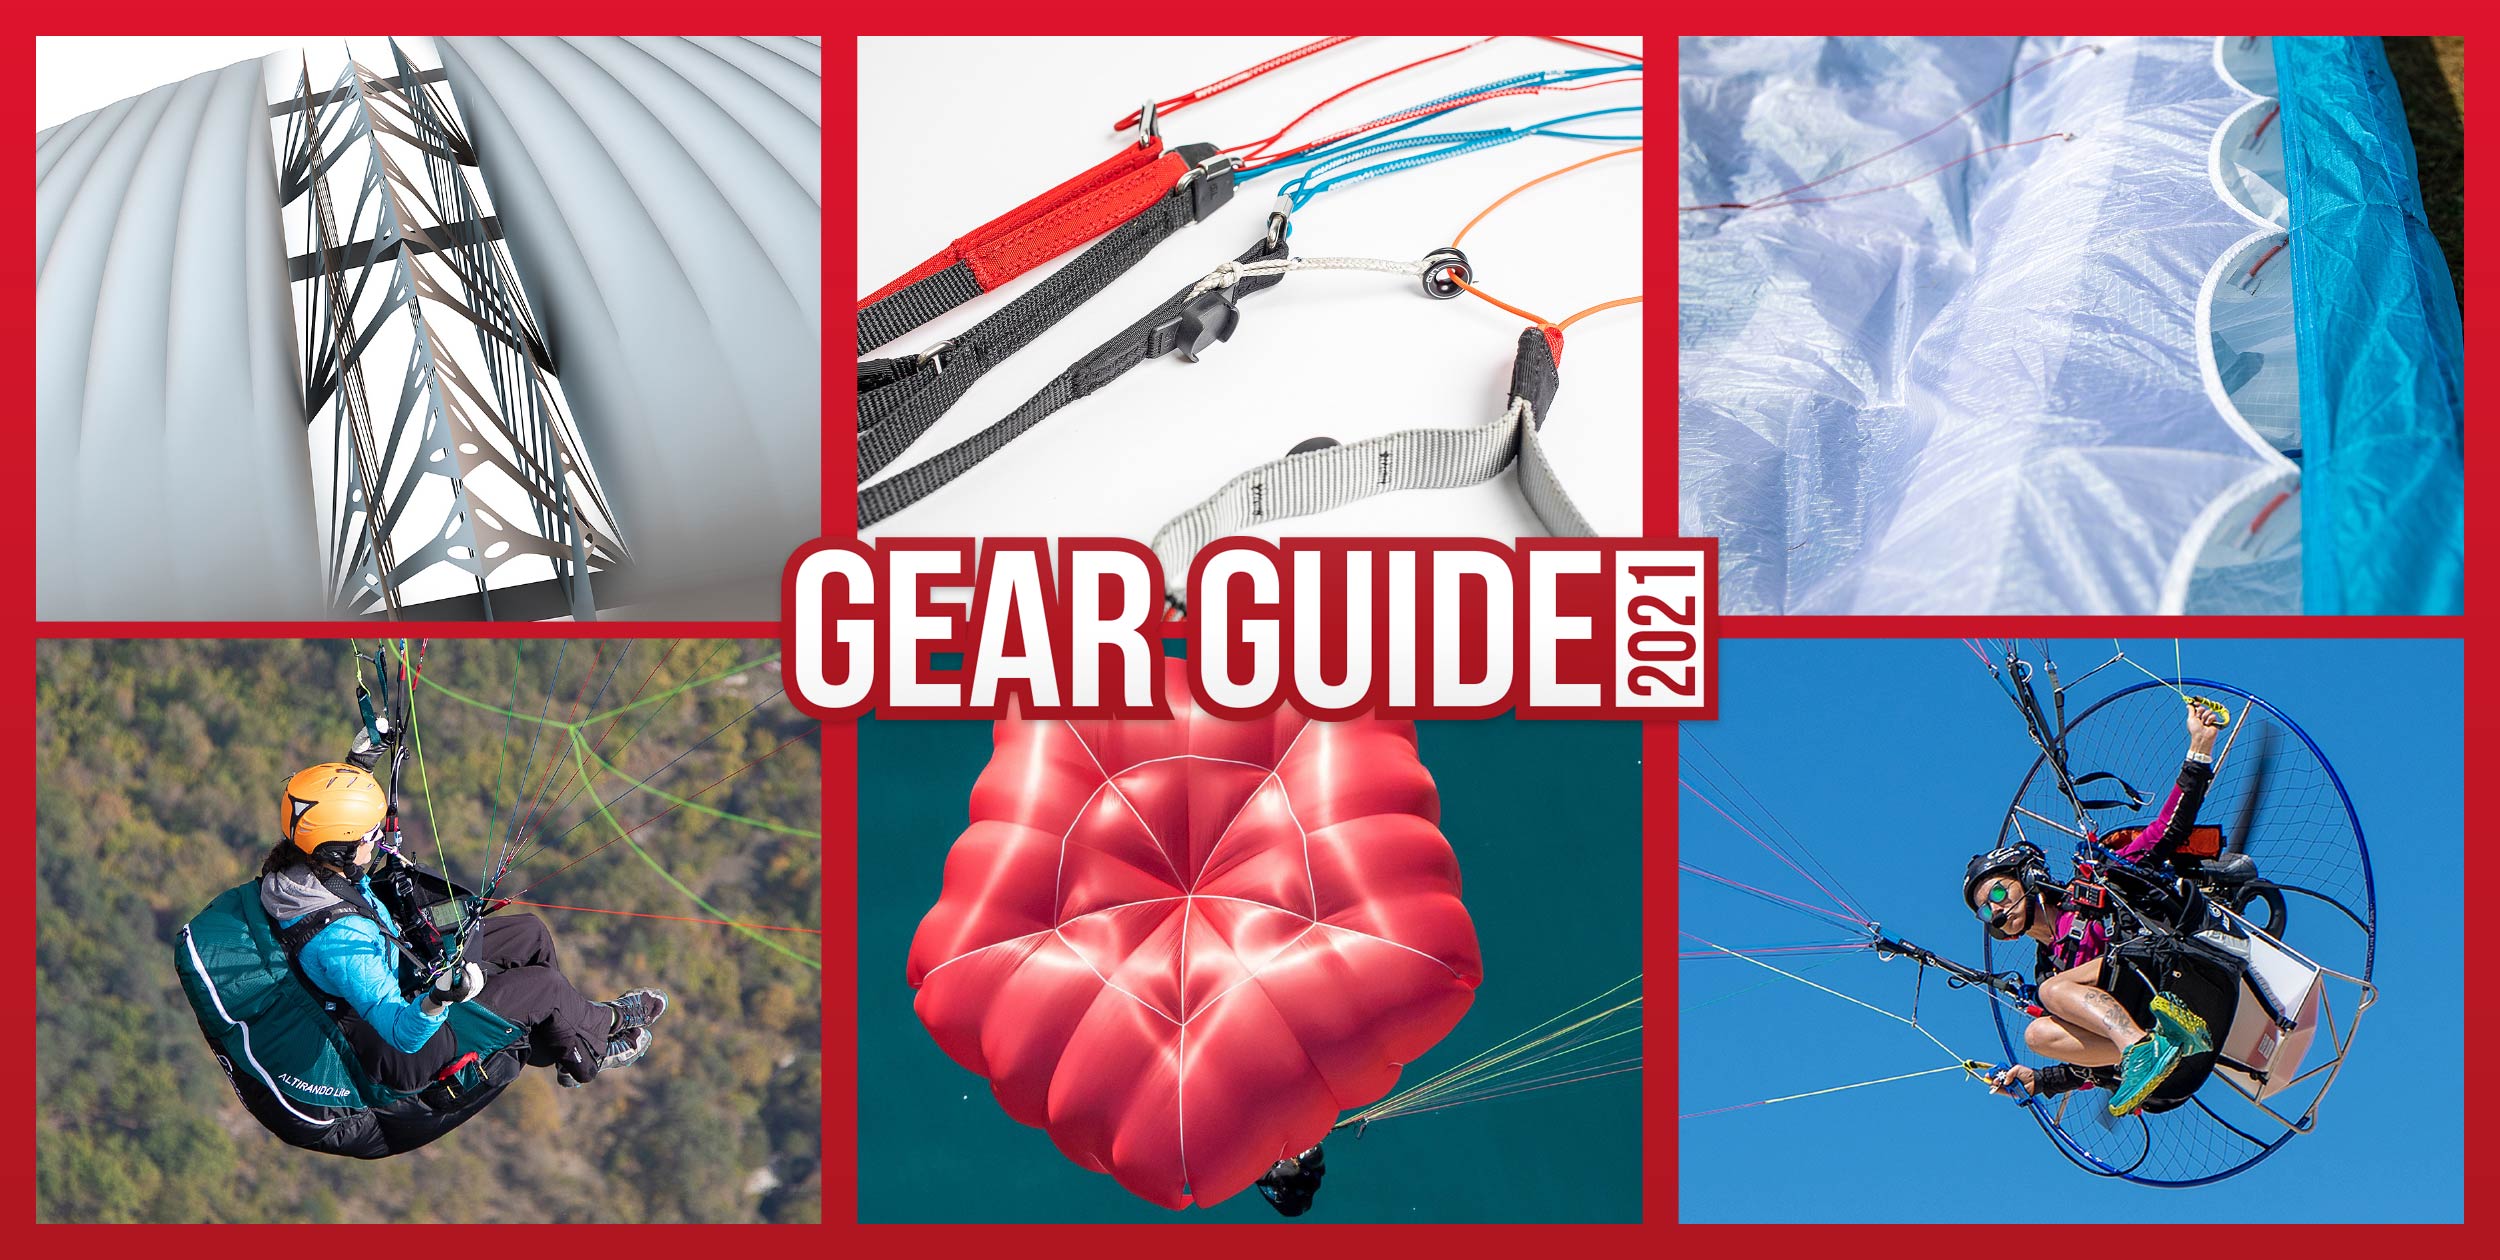 Cross Country Magazine Gear Guide 2021